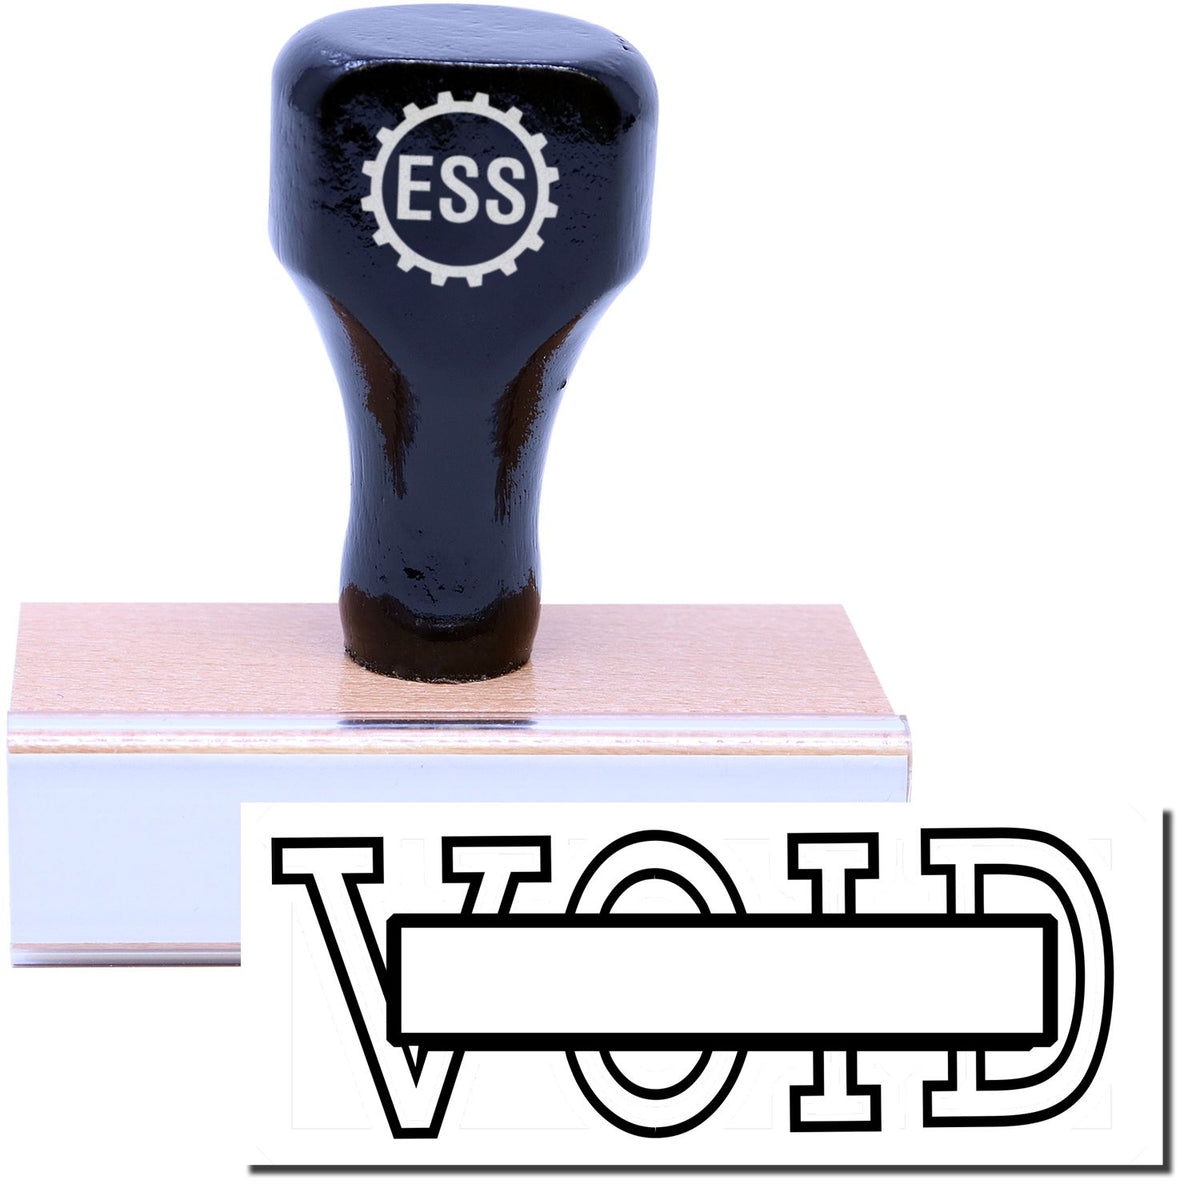 A stock office rubber stamp with a stamped image showing how the text &quot;VOID&quot; with a box in the center of the text is displayed after stamping.